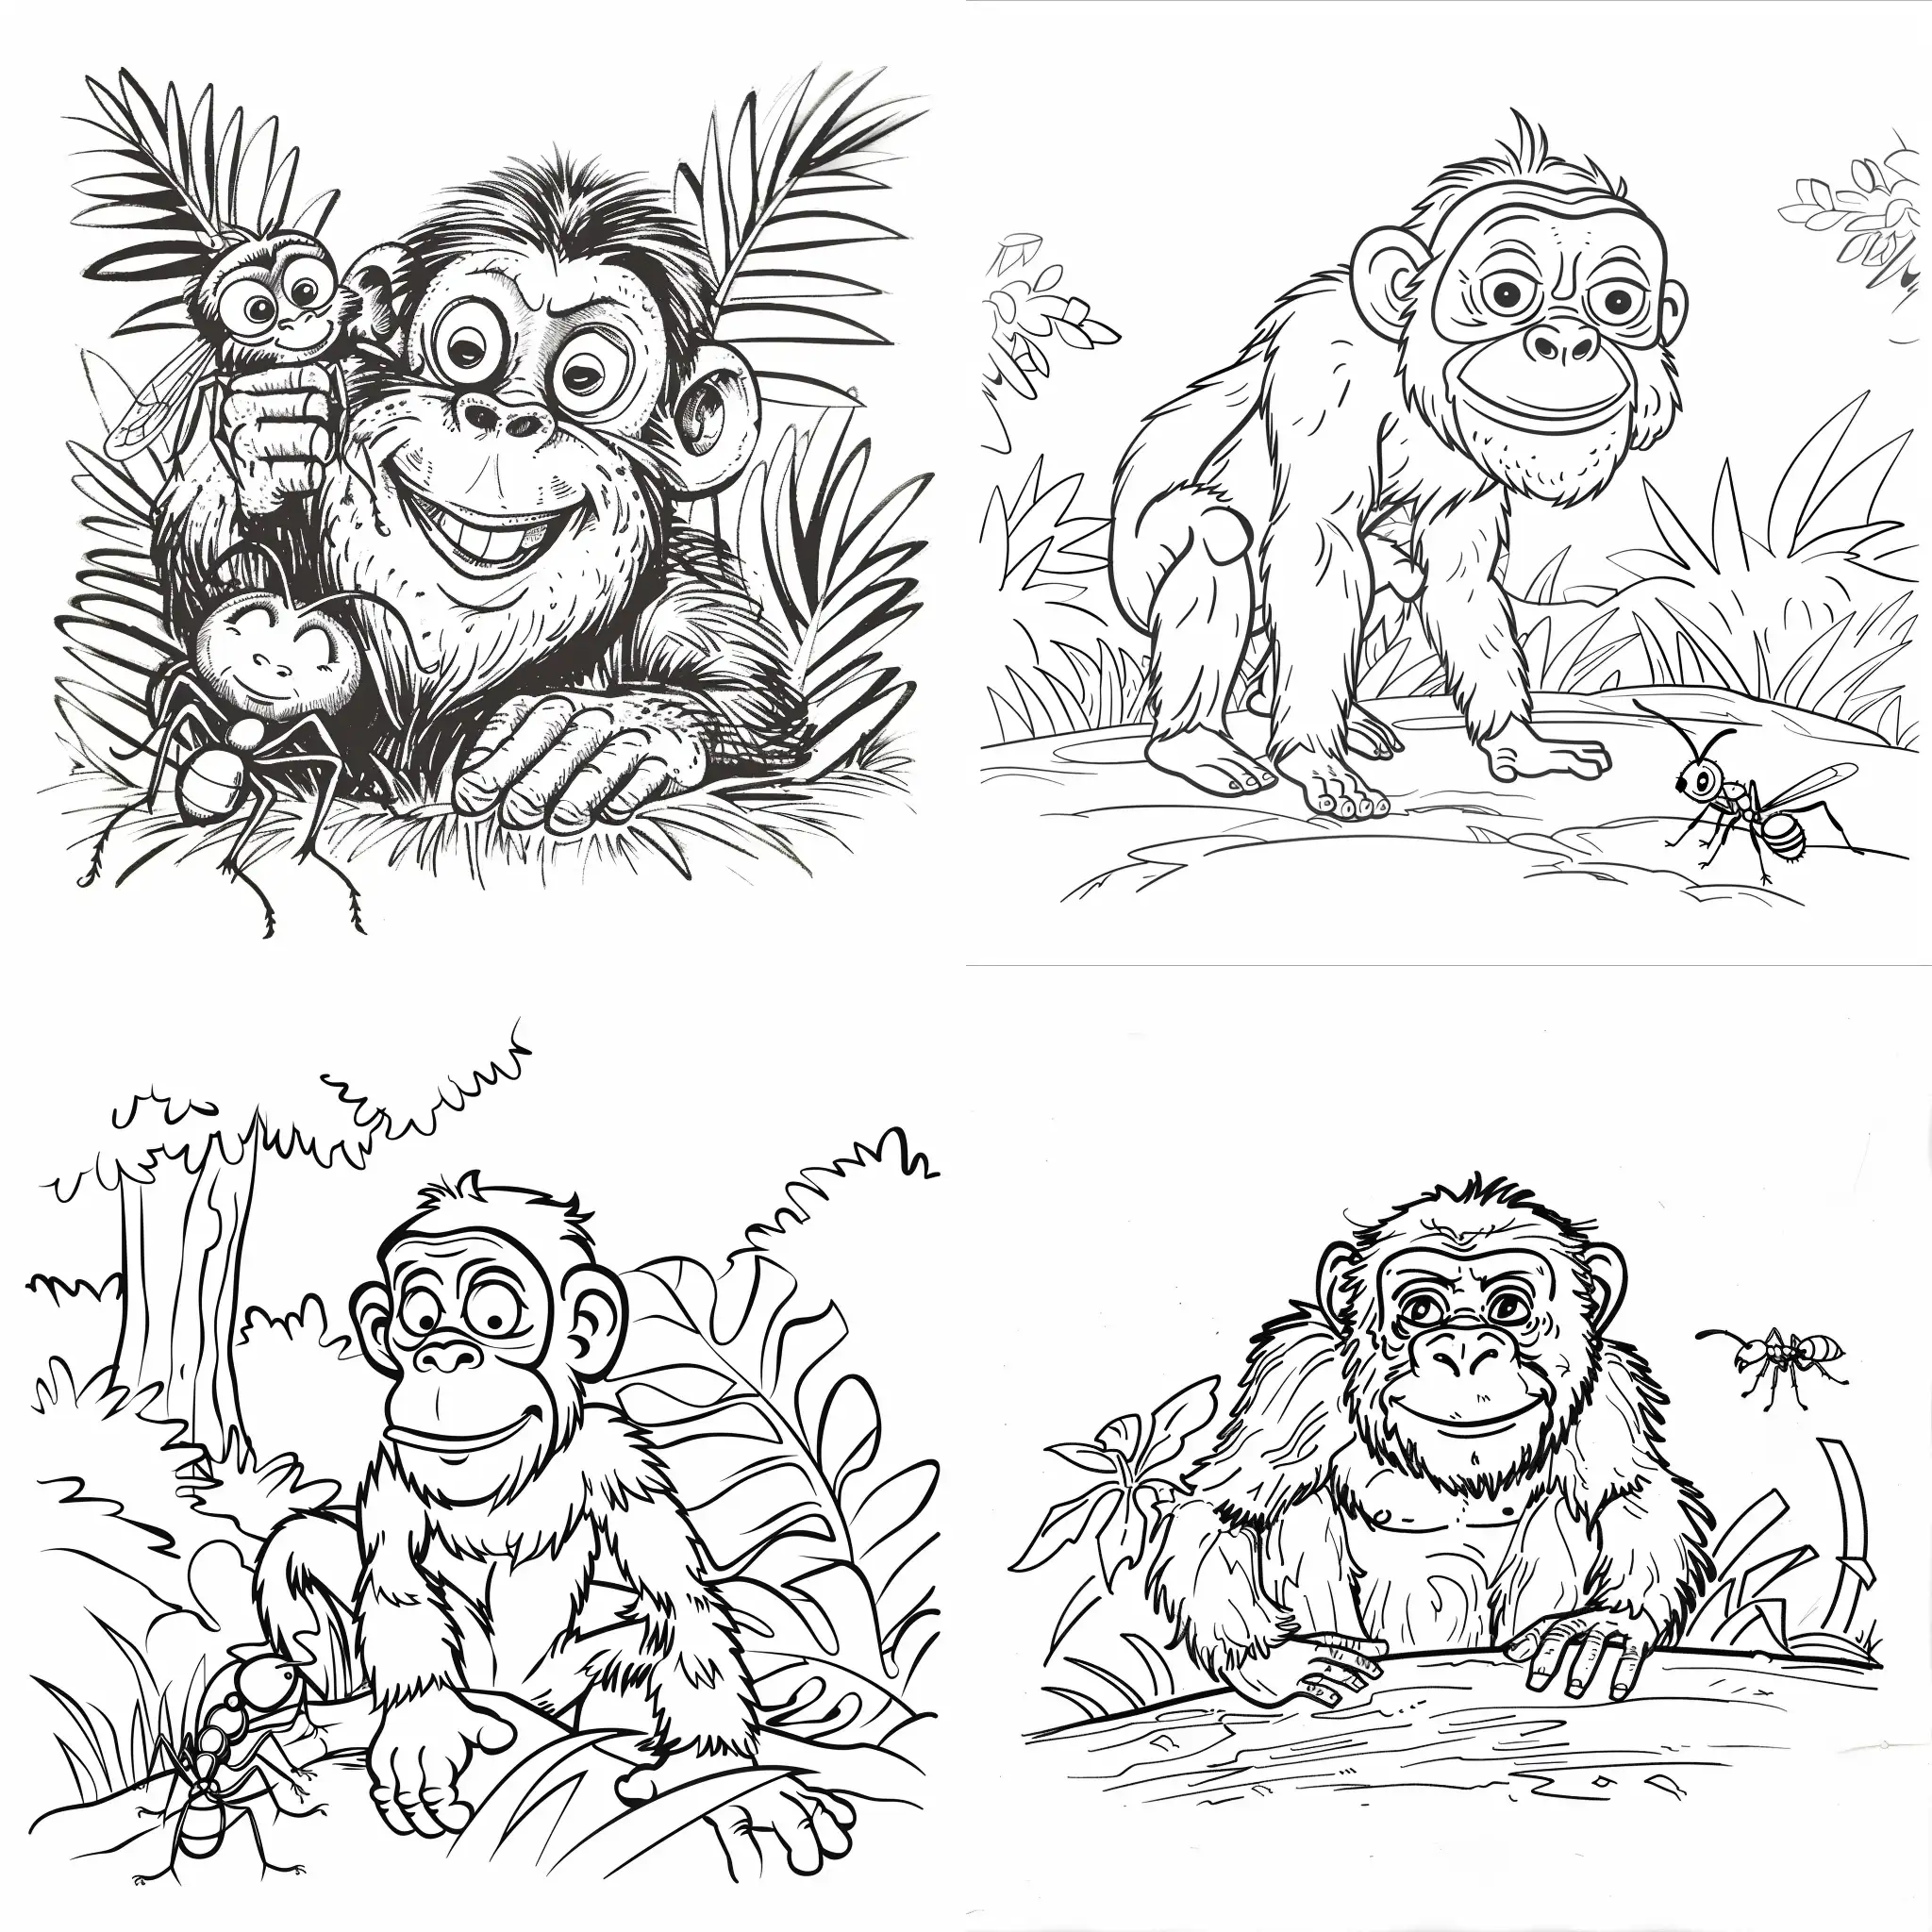 Ape and ant coloring page